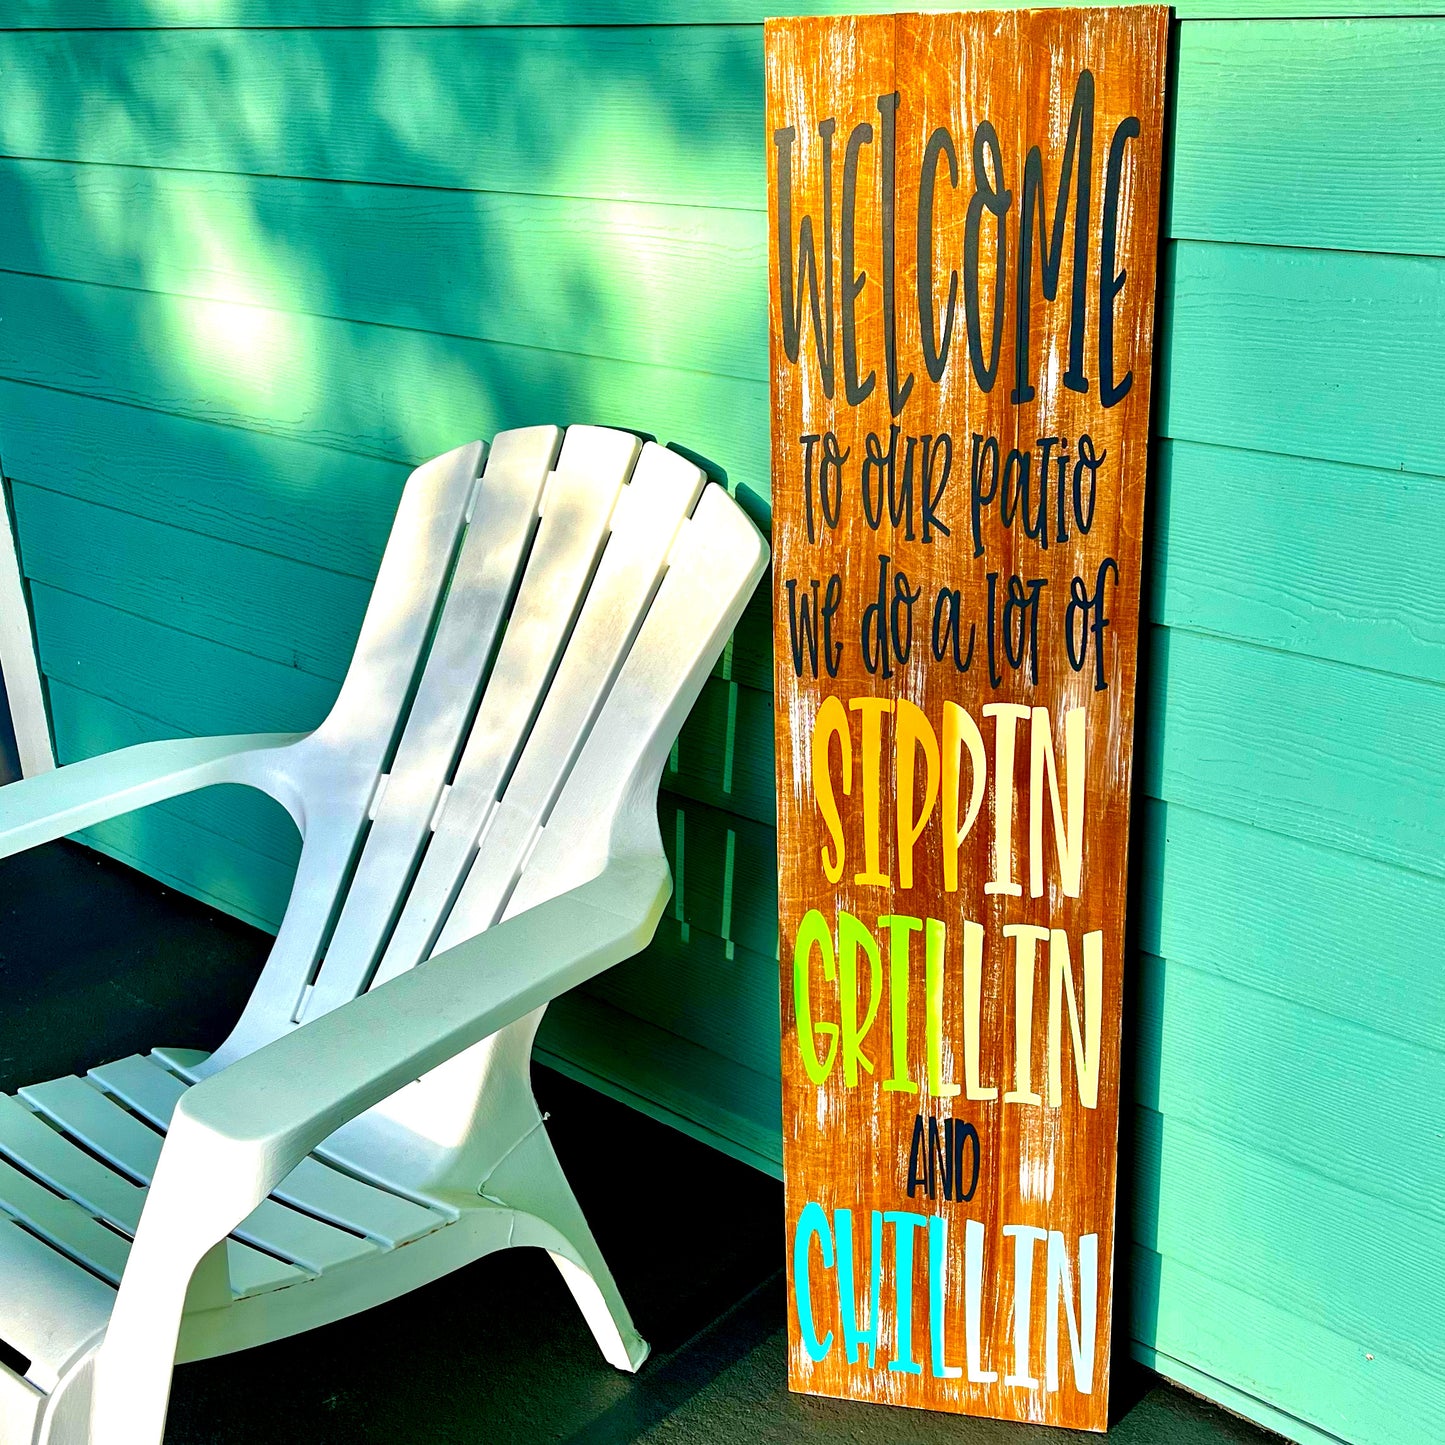 Welcome To Our Patio: Plank Design - Paisley Grace Makery